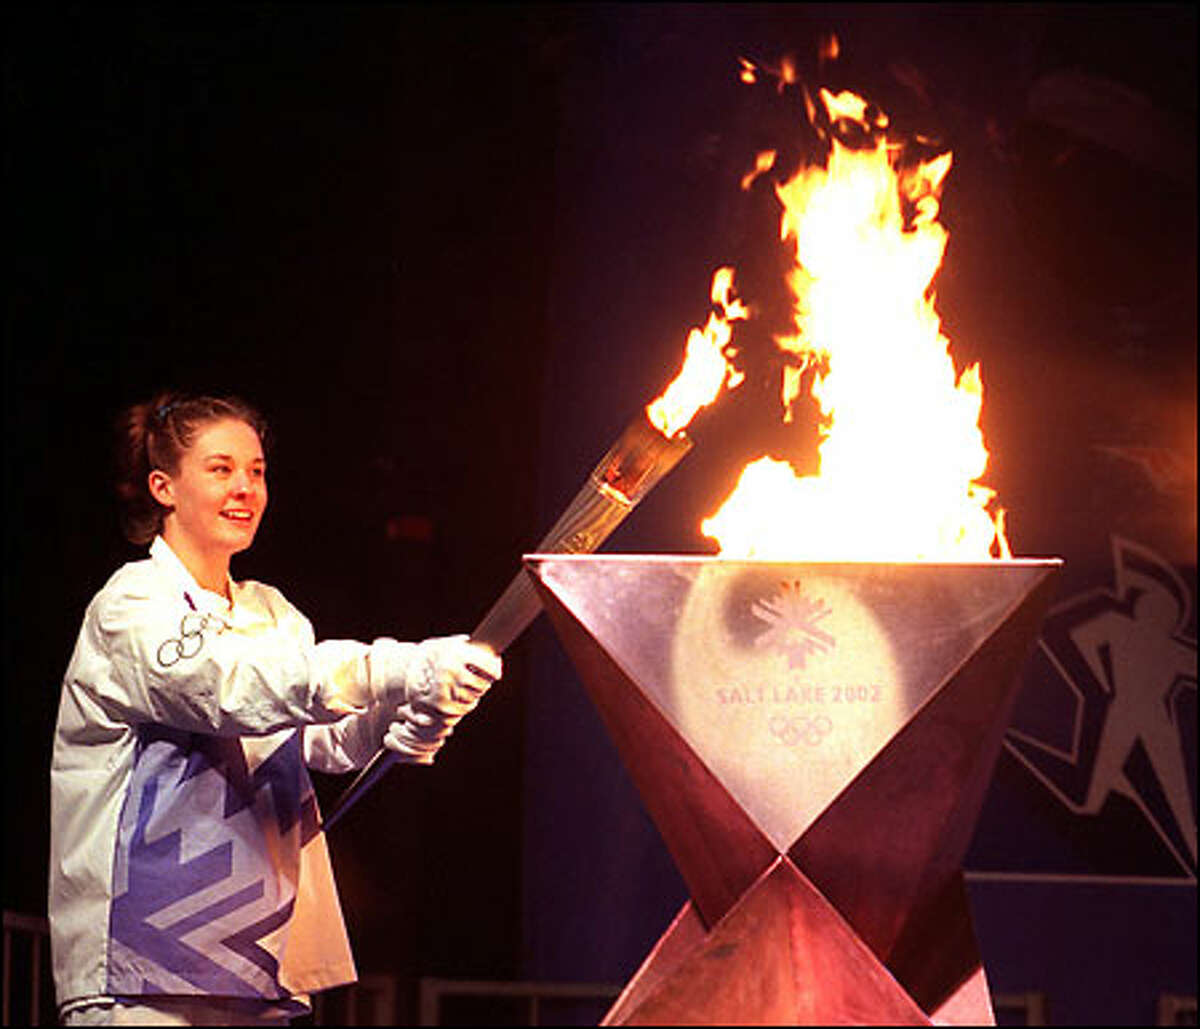 Megan Quann, a gold medalist in the 2002 Summer Games in Sydney, Australia, lit the Olympic flame at the Seattle Center on Jan. 23 prior to the running of the Torch Relay through the streets of Seattle.